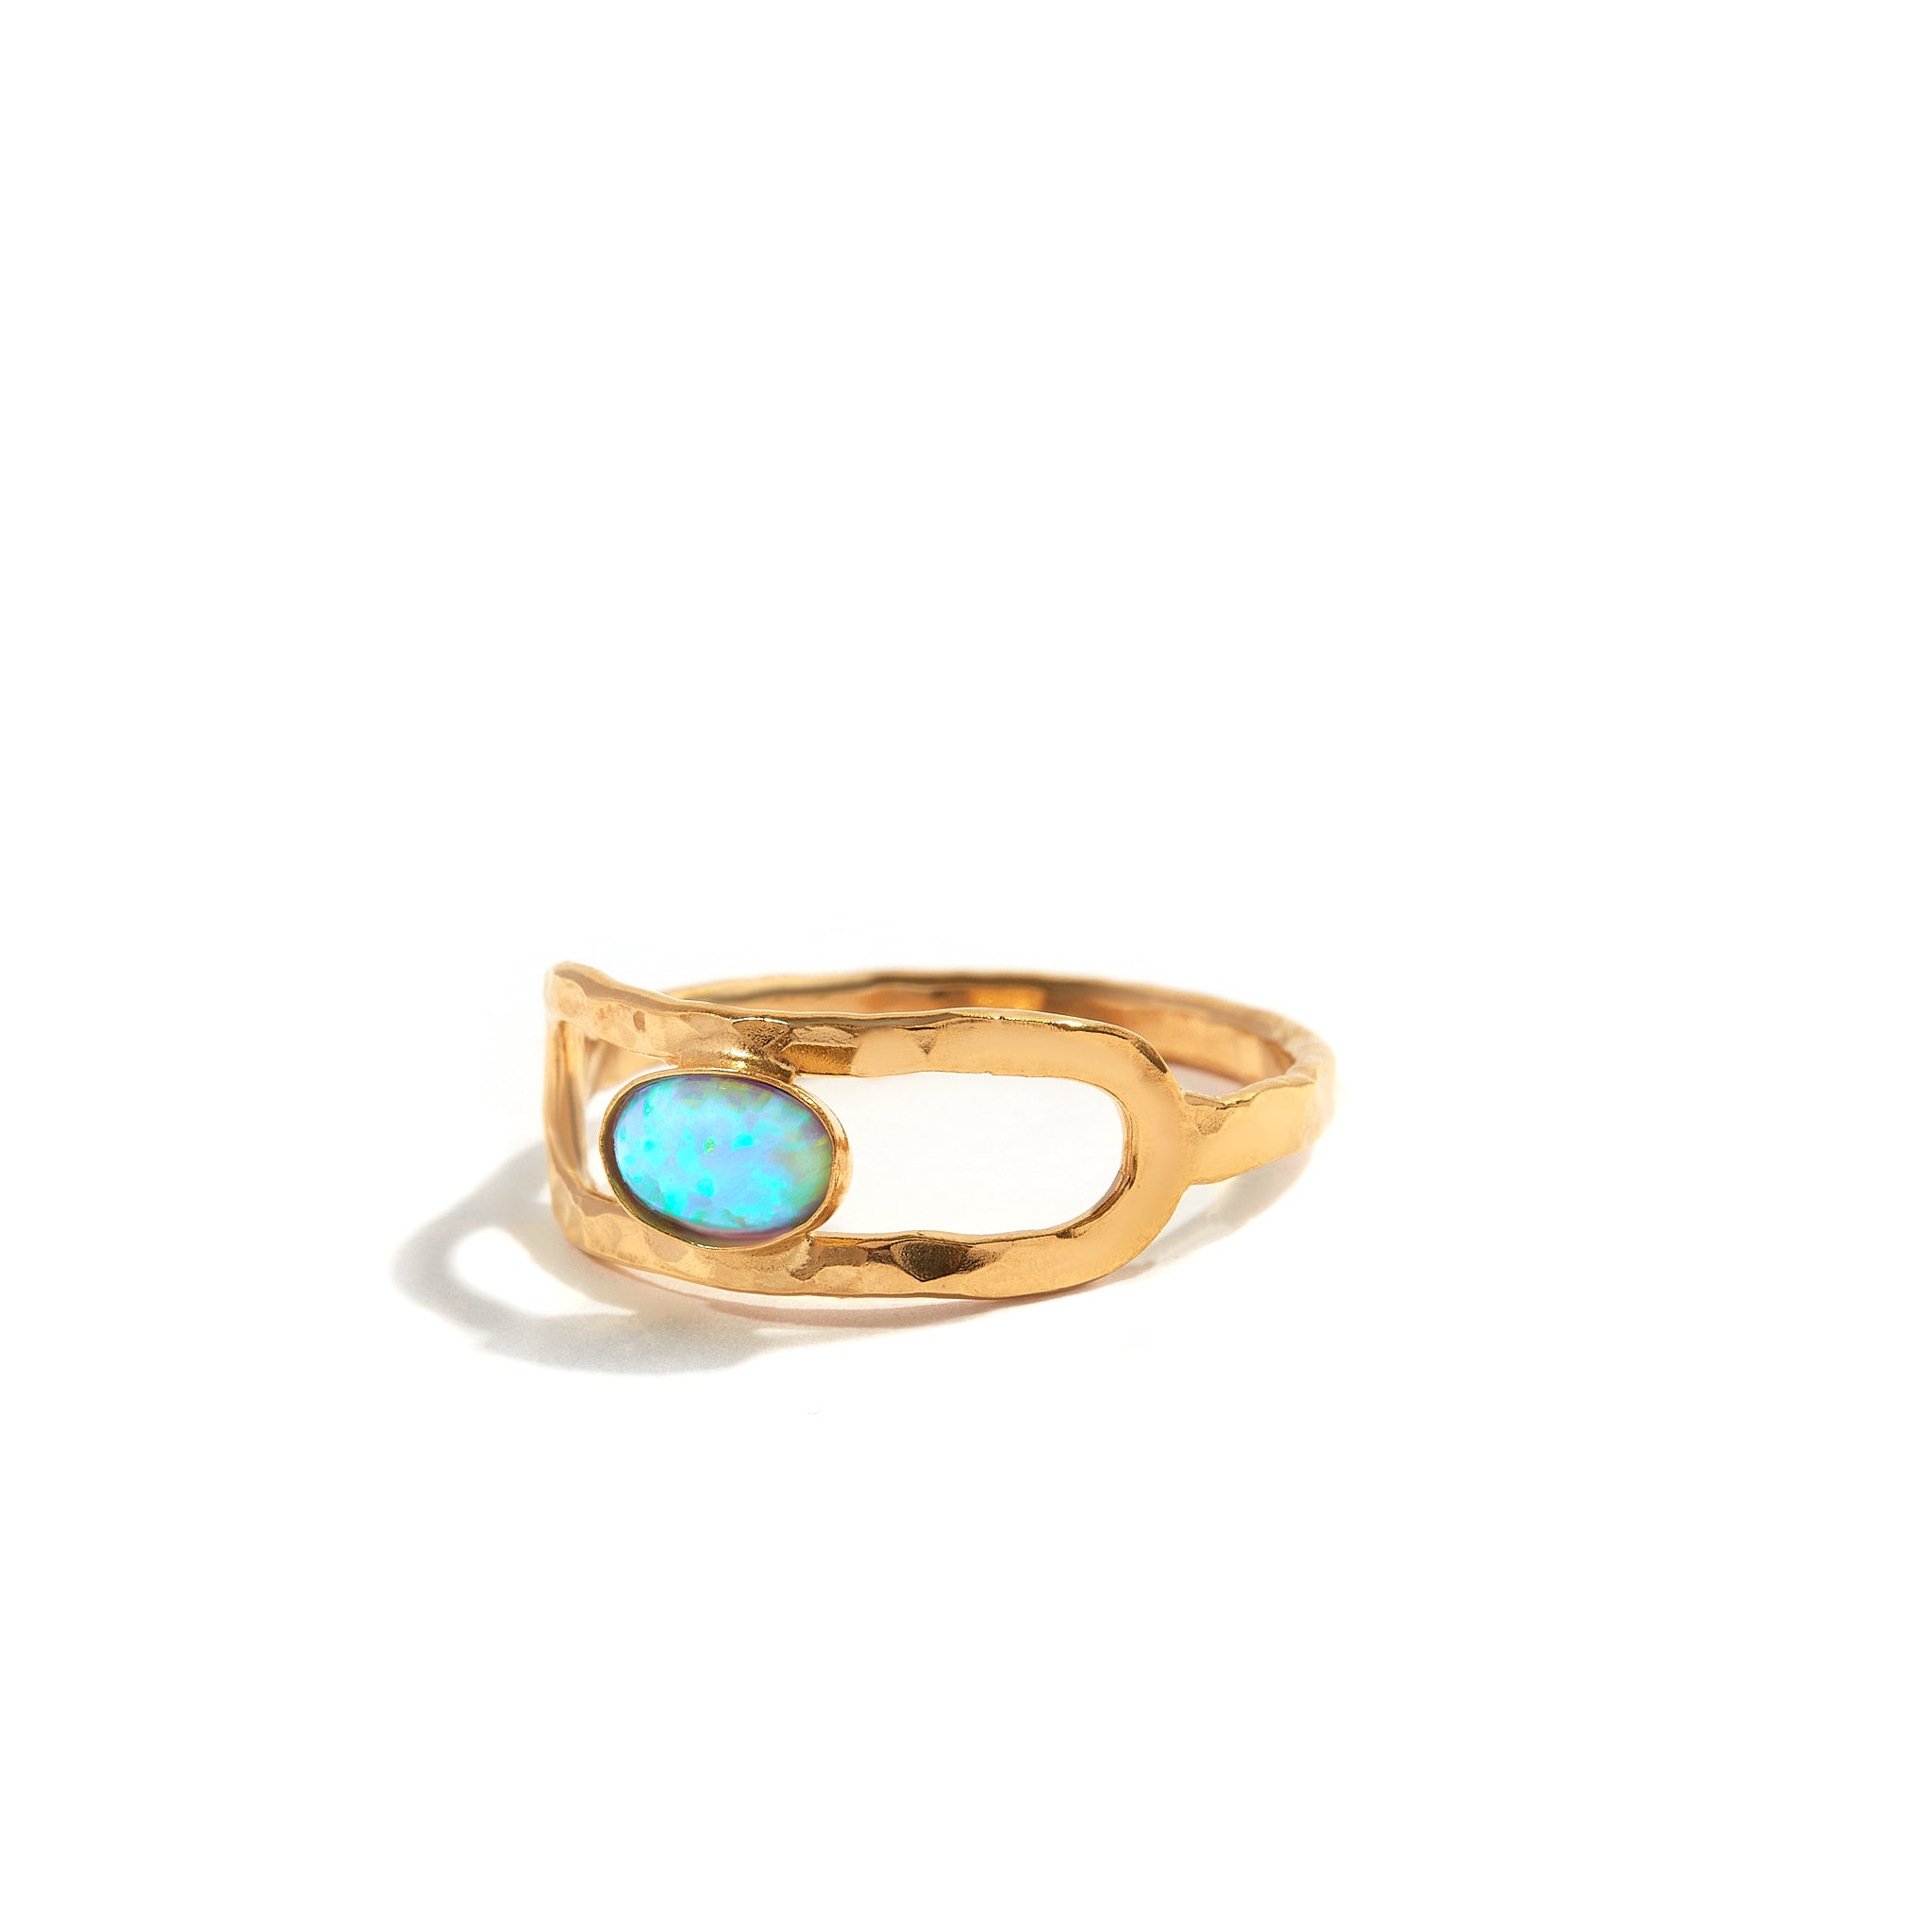 Dreamy Blue Opal Band Ring. It's a beautiful ring with a shiny blue opal. The design is modern and comfortable to wear.&nbsp; Perfect for adding a special touch to your everyday style